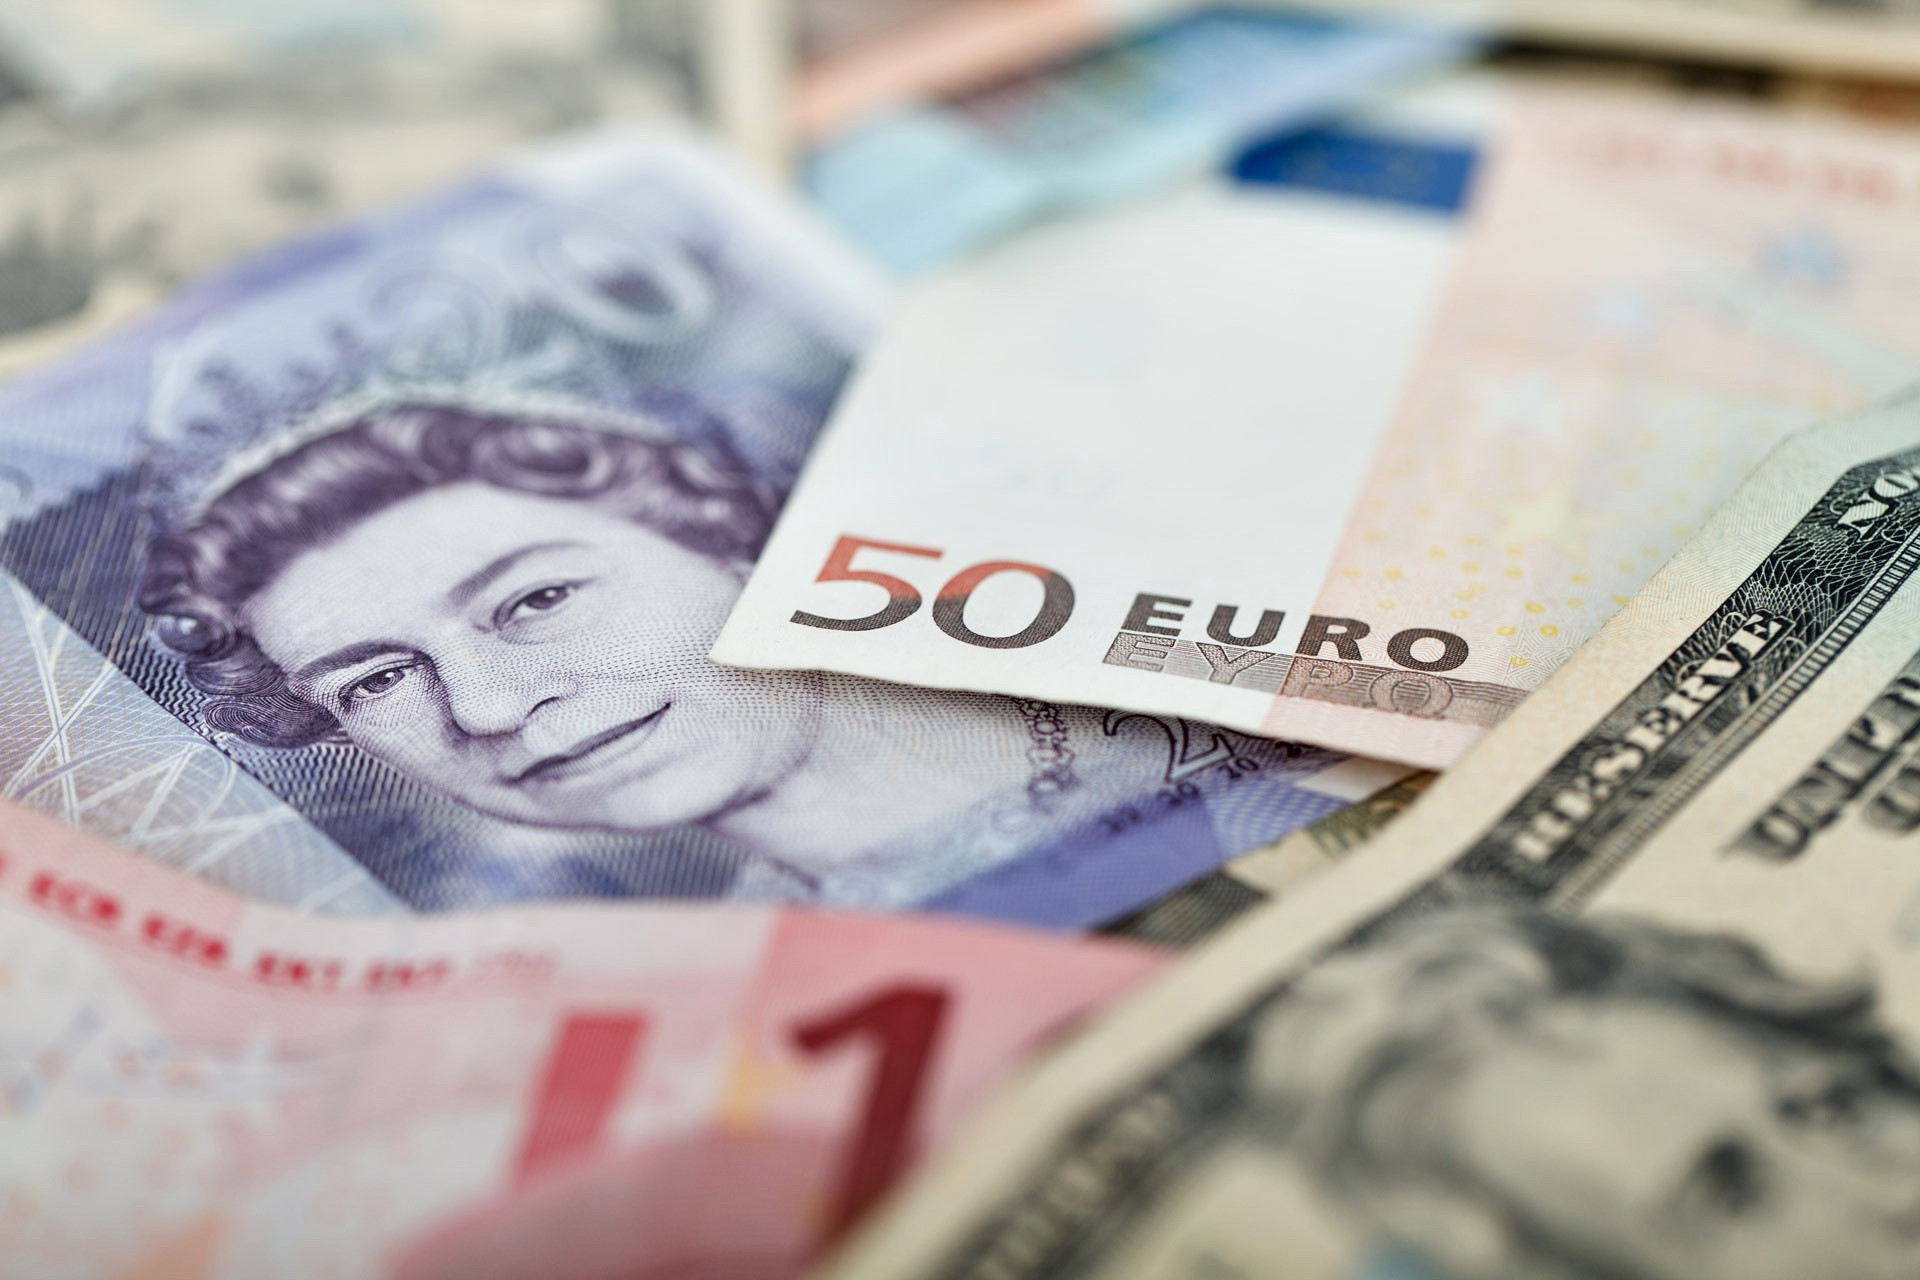 Currency Exchange - British Pounds to Euros